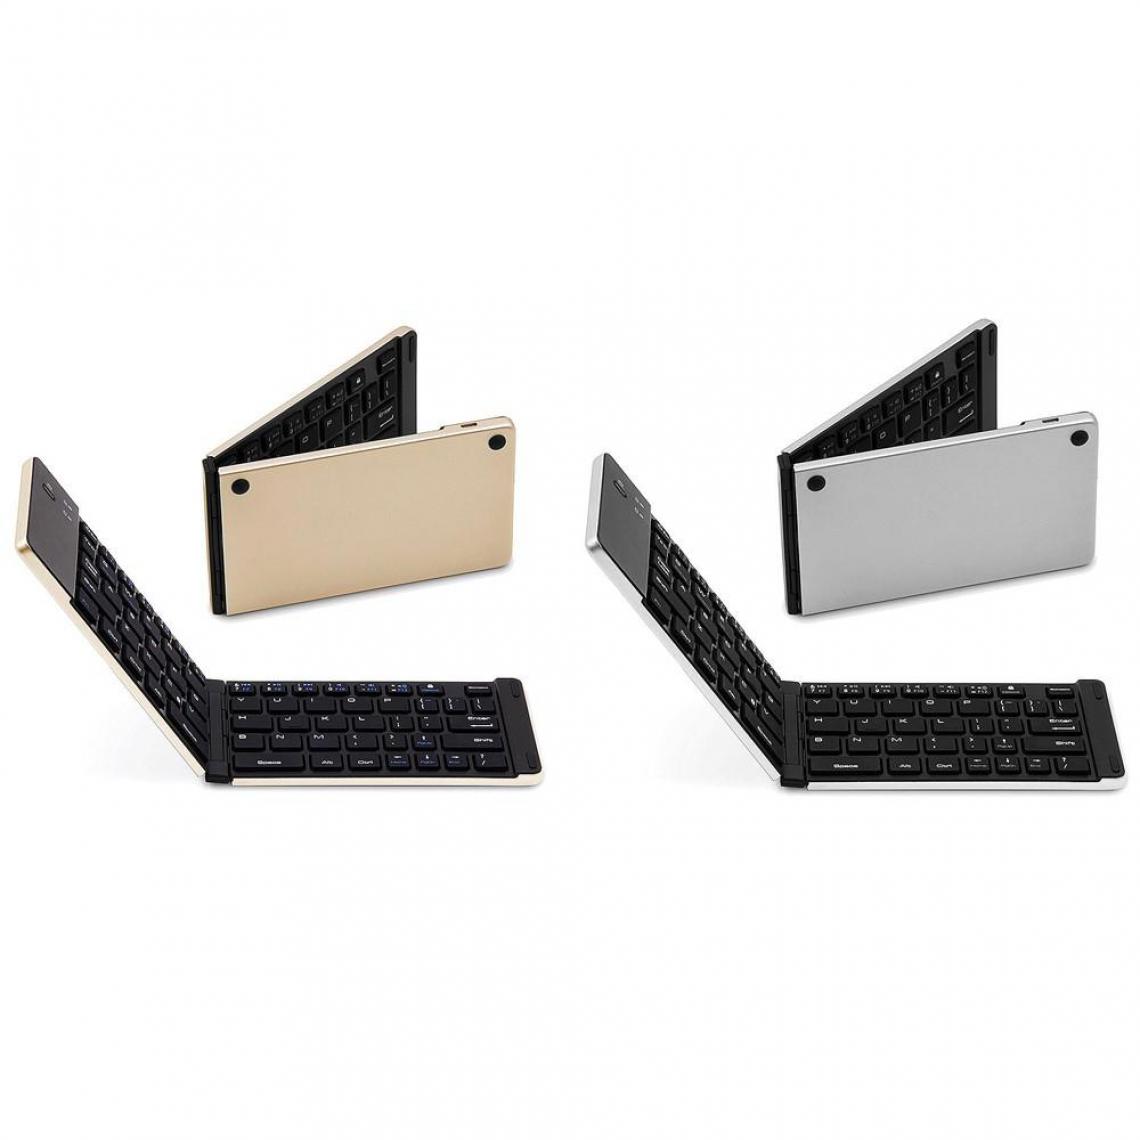 Justgreenbox - Clavier BT sans fil pliable portable ultra mince, Or - Clavier